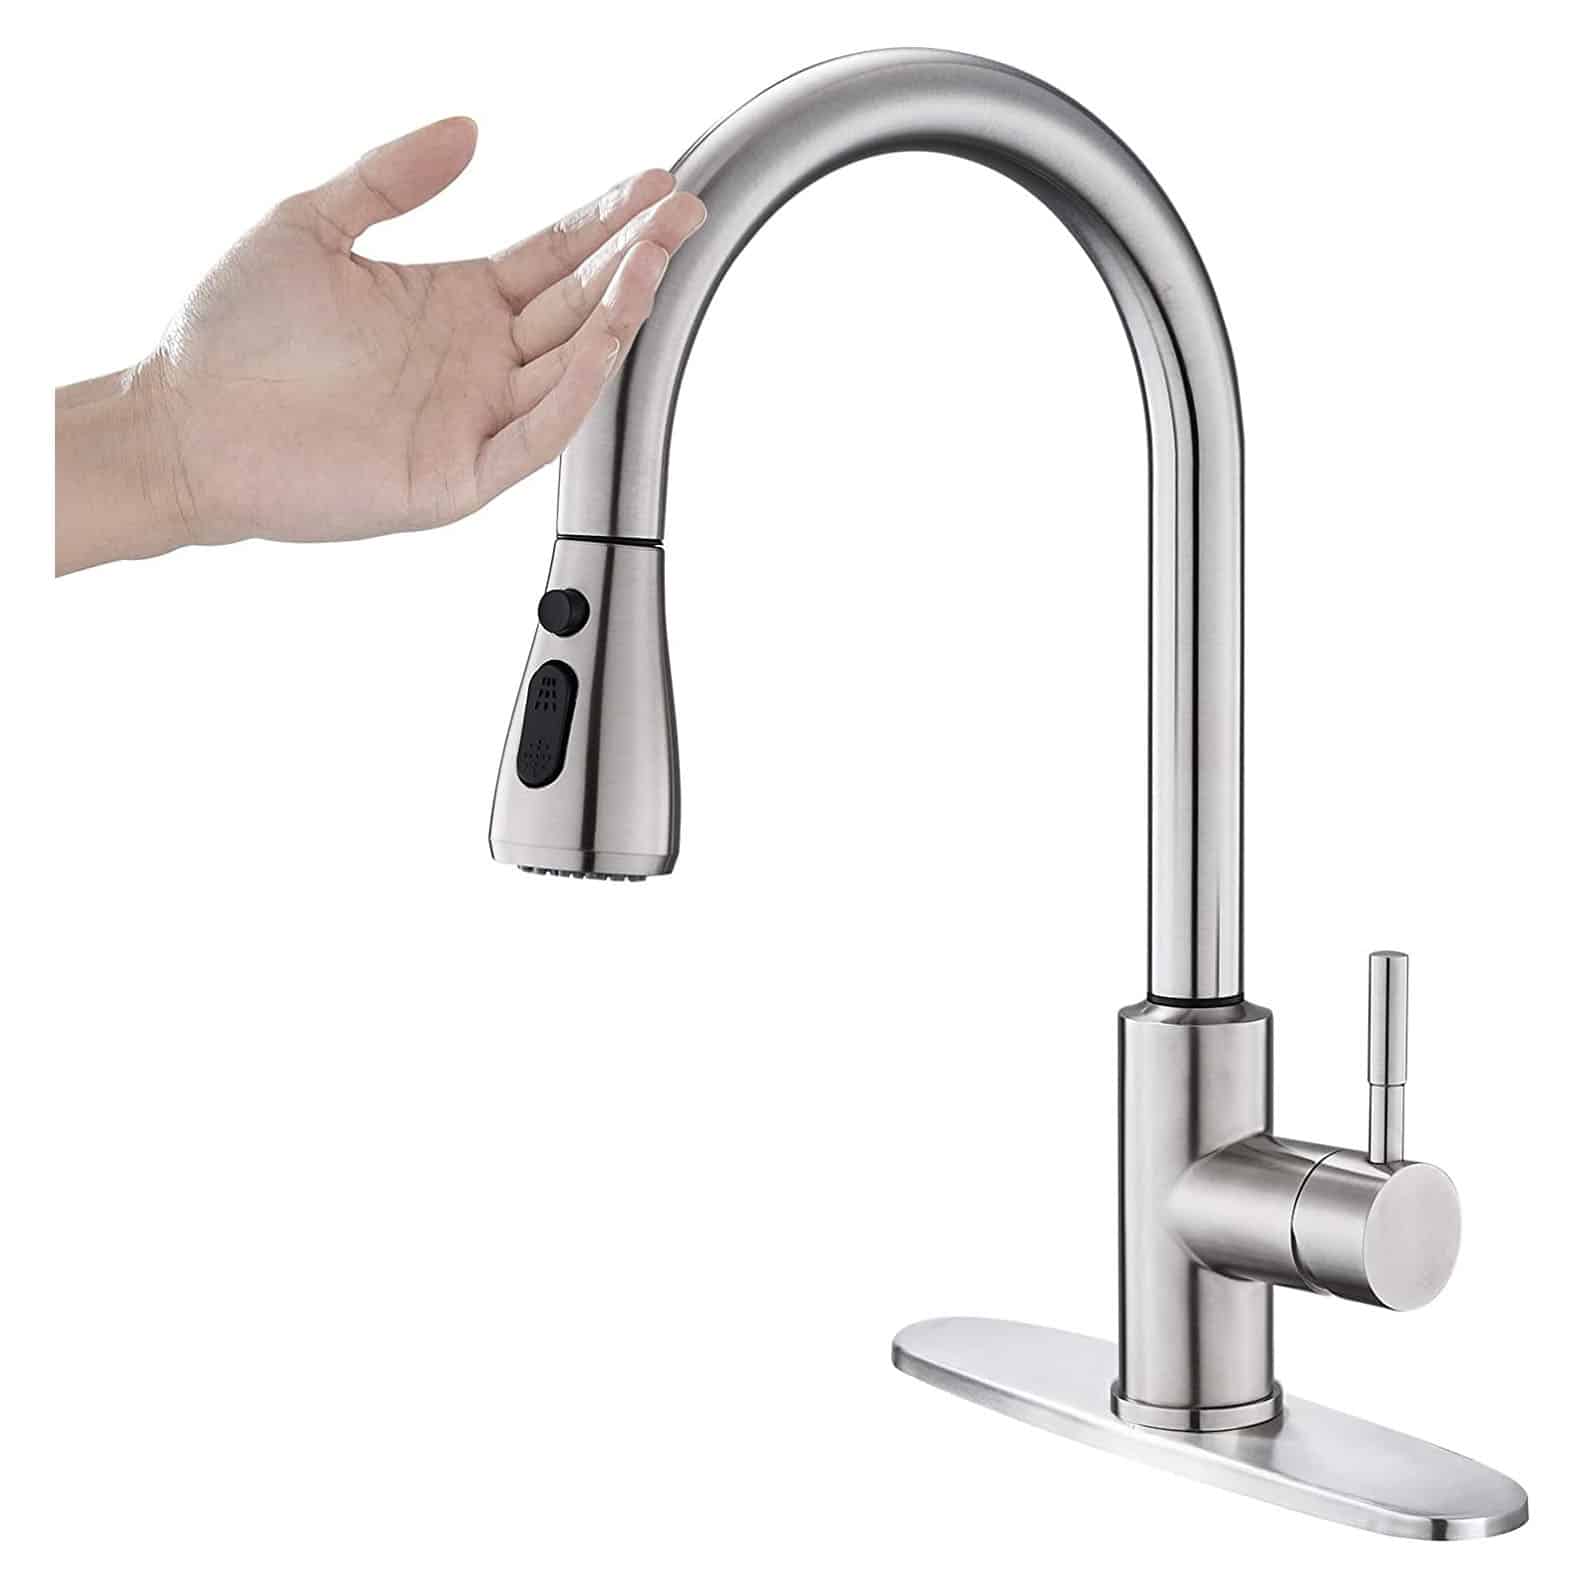 10. OUGOO Touch On Kitchen Faucet 304 Stainless Steel 